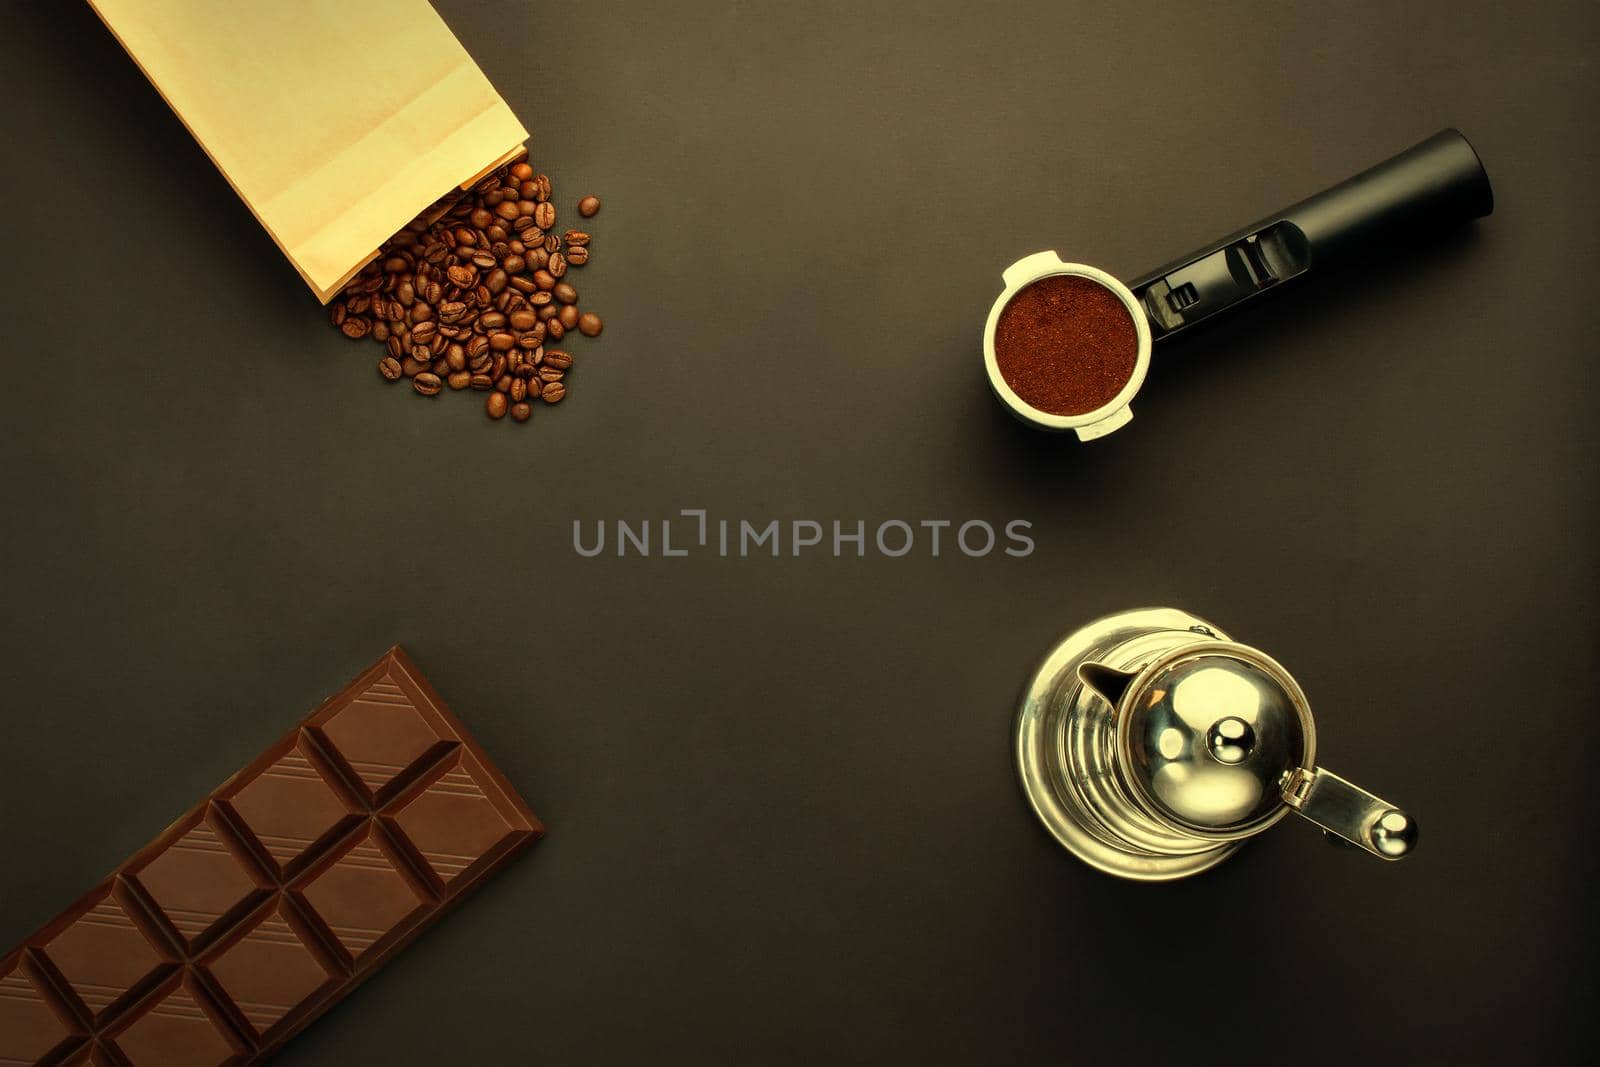 Coffee espresso in a holder, coffee-beans, bar of chocolate, coffee-pot